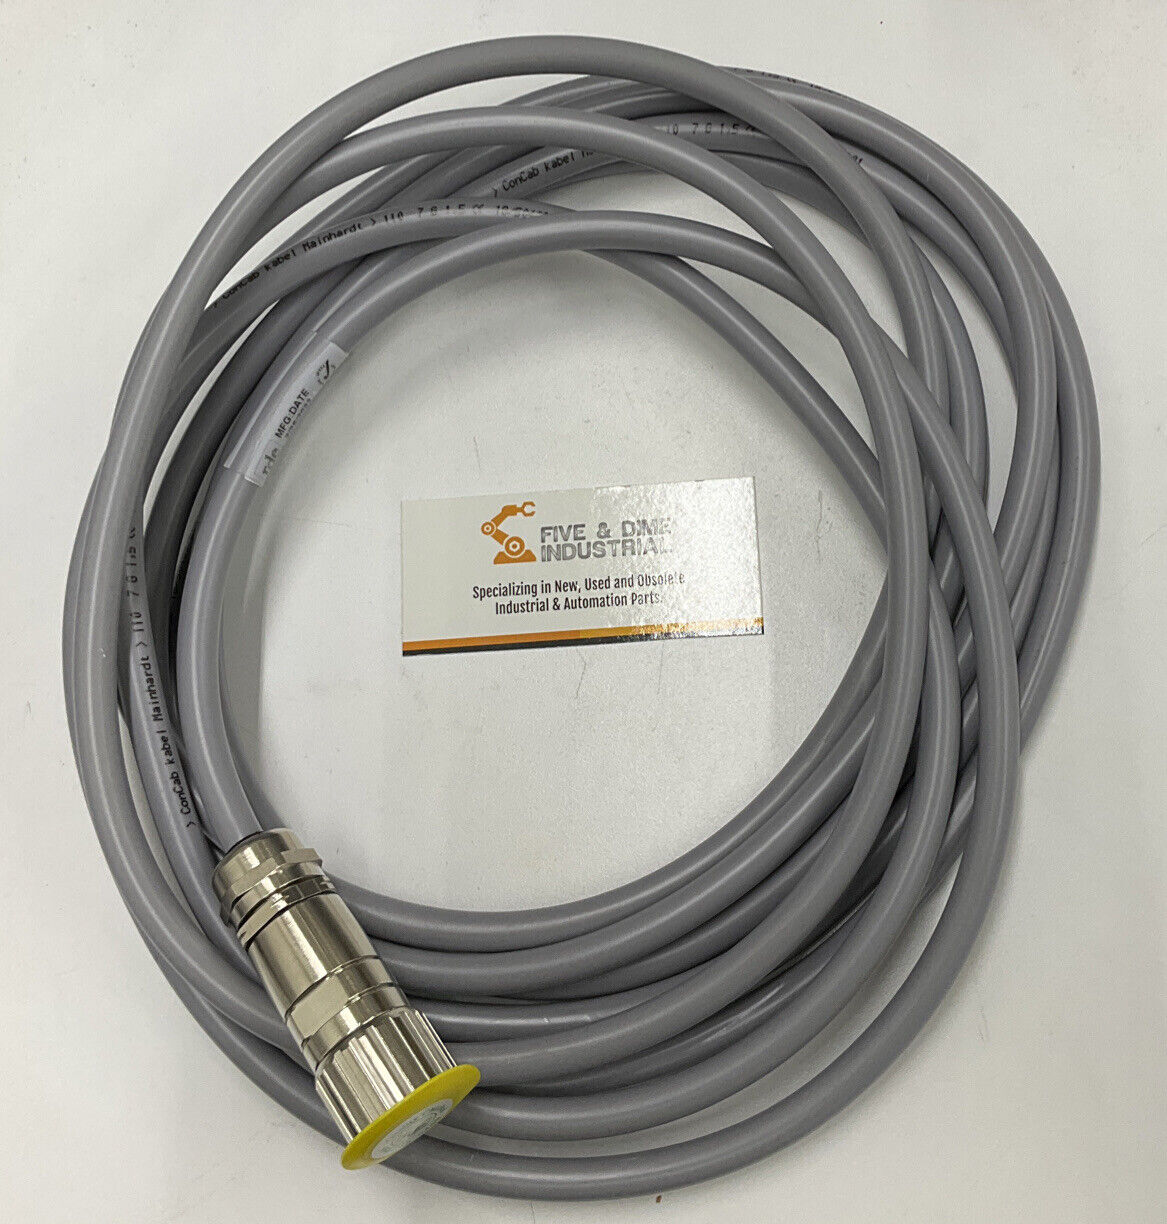 RDE Connects AR-06F1-0000-7LU-015F Connector Cable 15 Feet (CBL136)